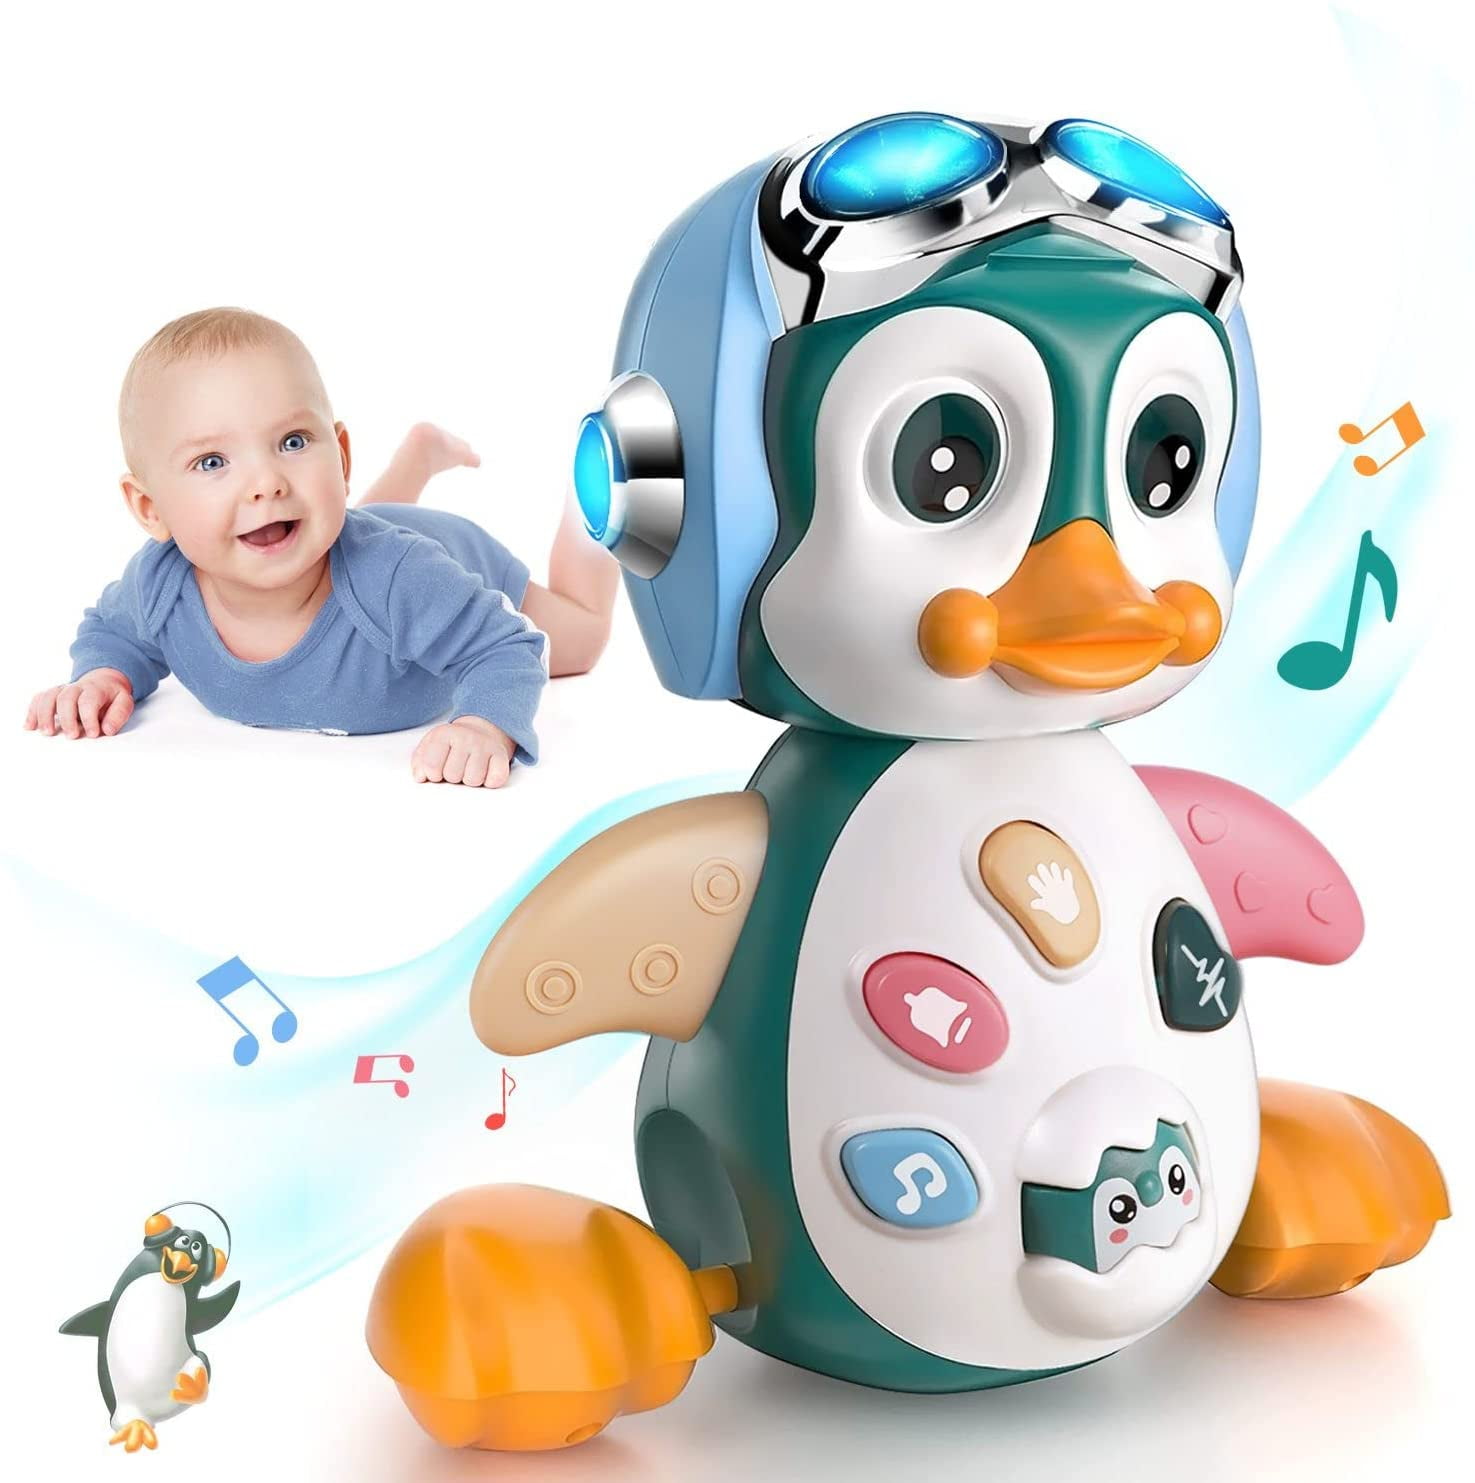 Boys and Girls Ages 6 9 12 18 Months & Up Baby Musical Jellyfish Toy 1 to 5 Year Old Toddlers Electronic Light Up Dancing Play Set w/ Music & Sounds & Lights Early Development Gift for Infants